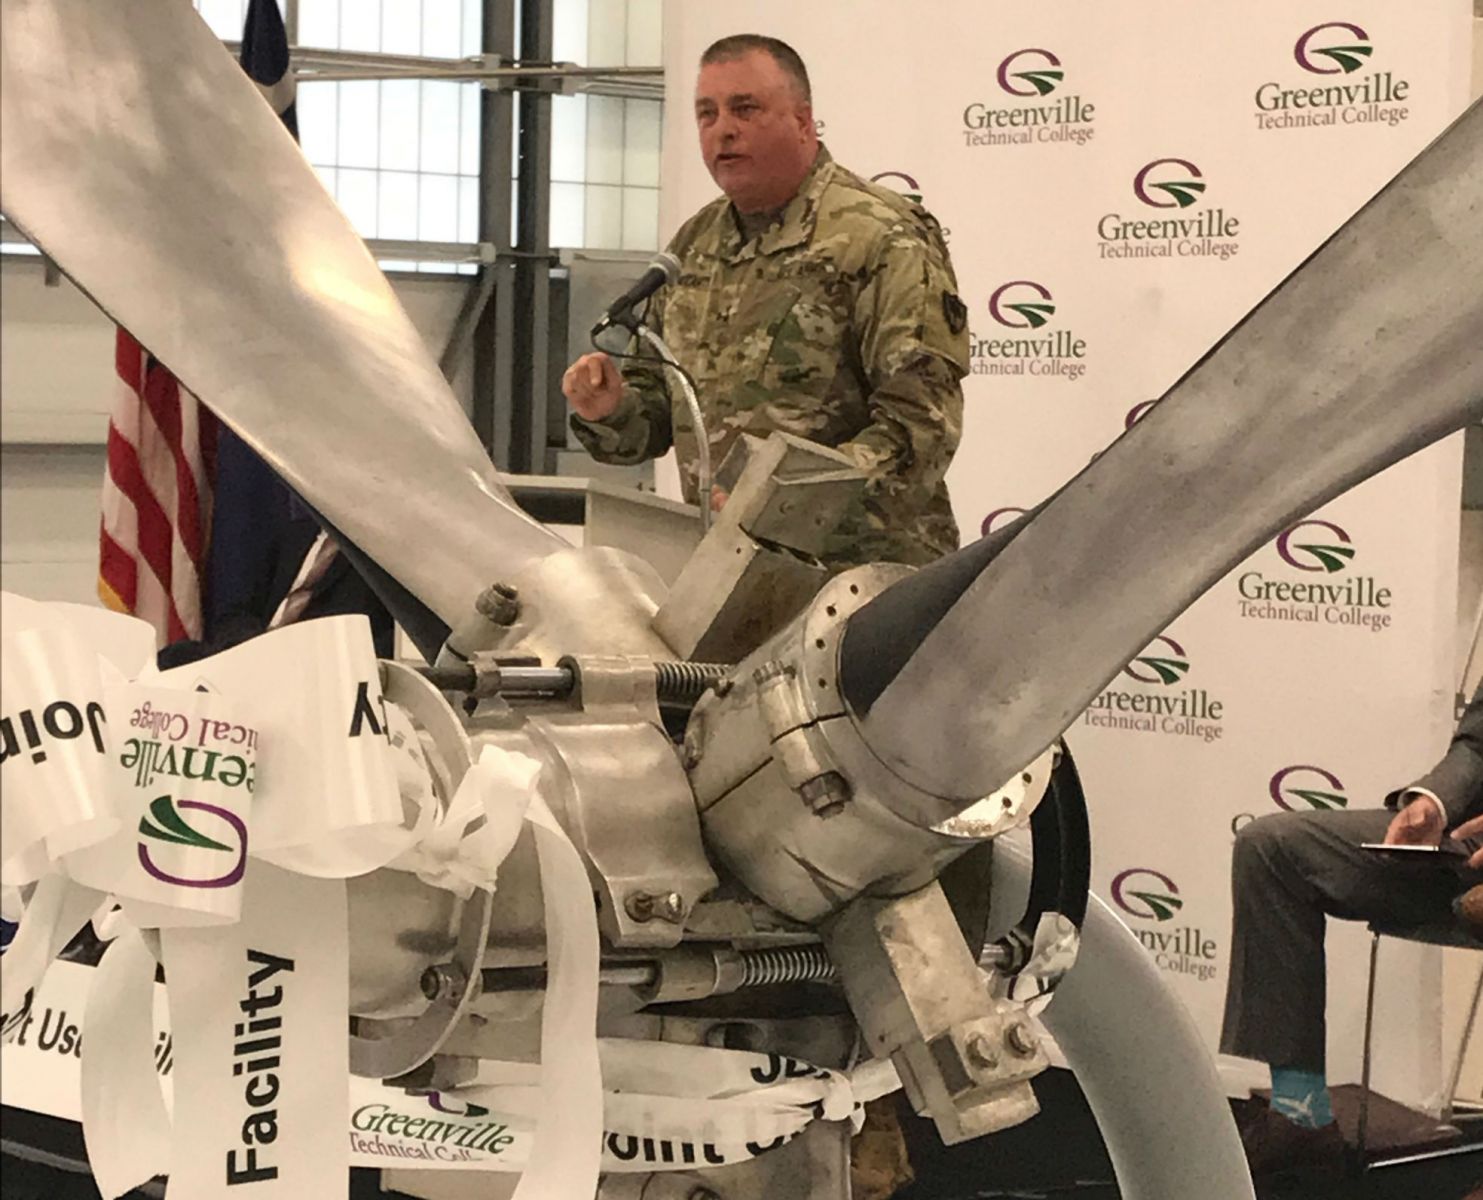 Maj. Gen. R. Van McCarty, deputy adjutant general of the S.C. National Guard, makes remarks during the opening of the Joint Use Facility the Guard will share with Greenville Technical College. (Photo/Teresa Cutlip)